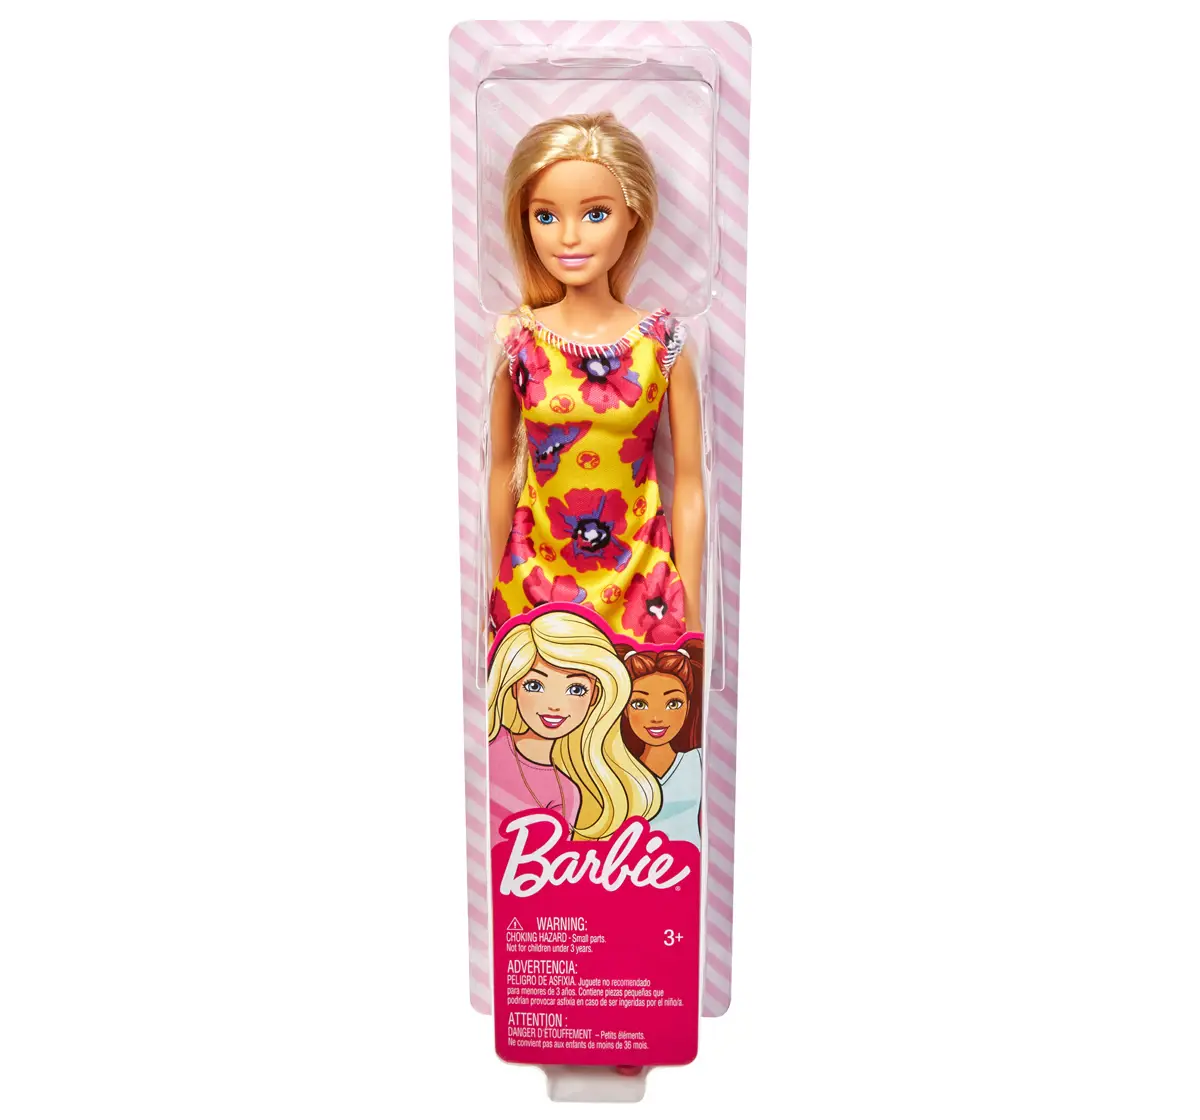 Premium Photo  Barbie doll with shopping bags and cell phone in